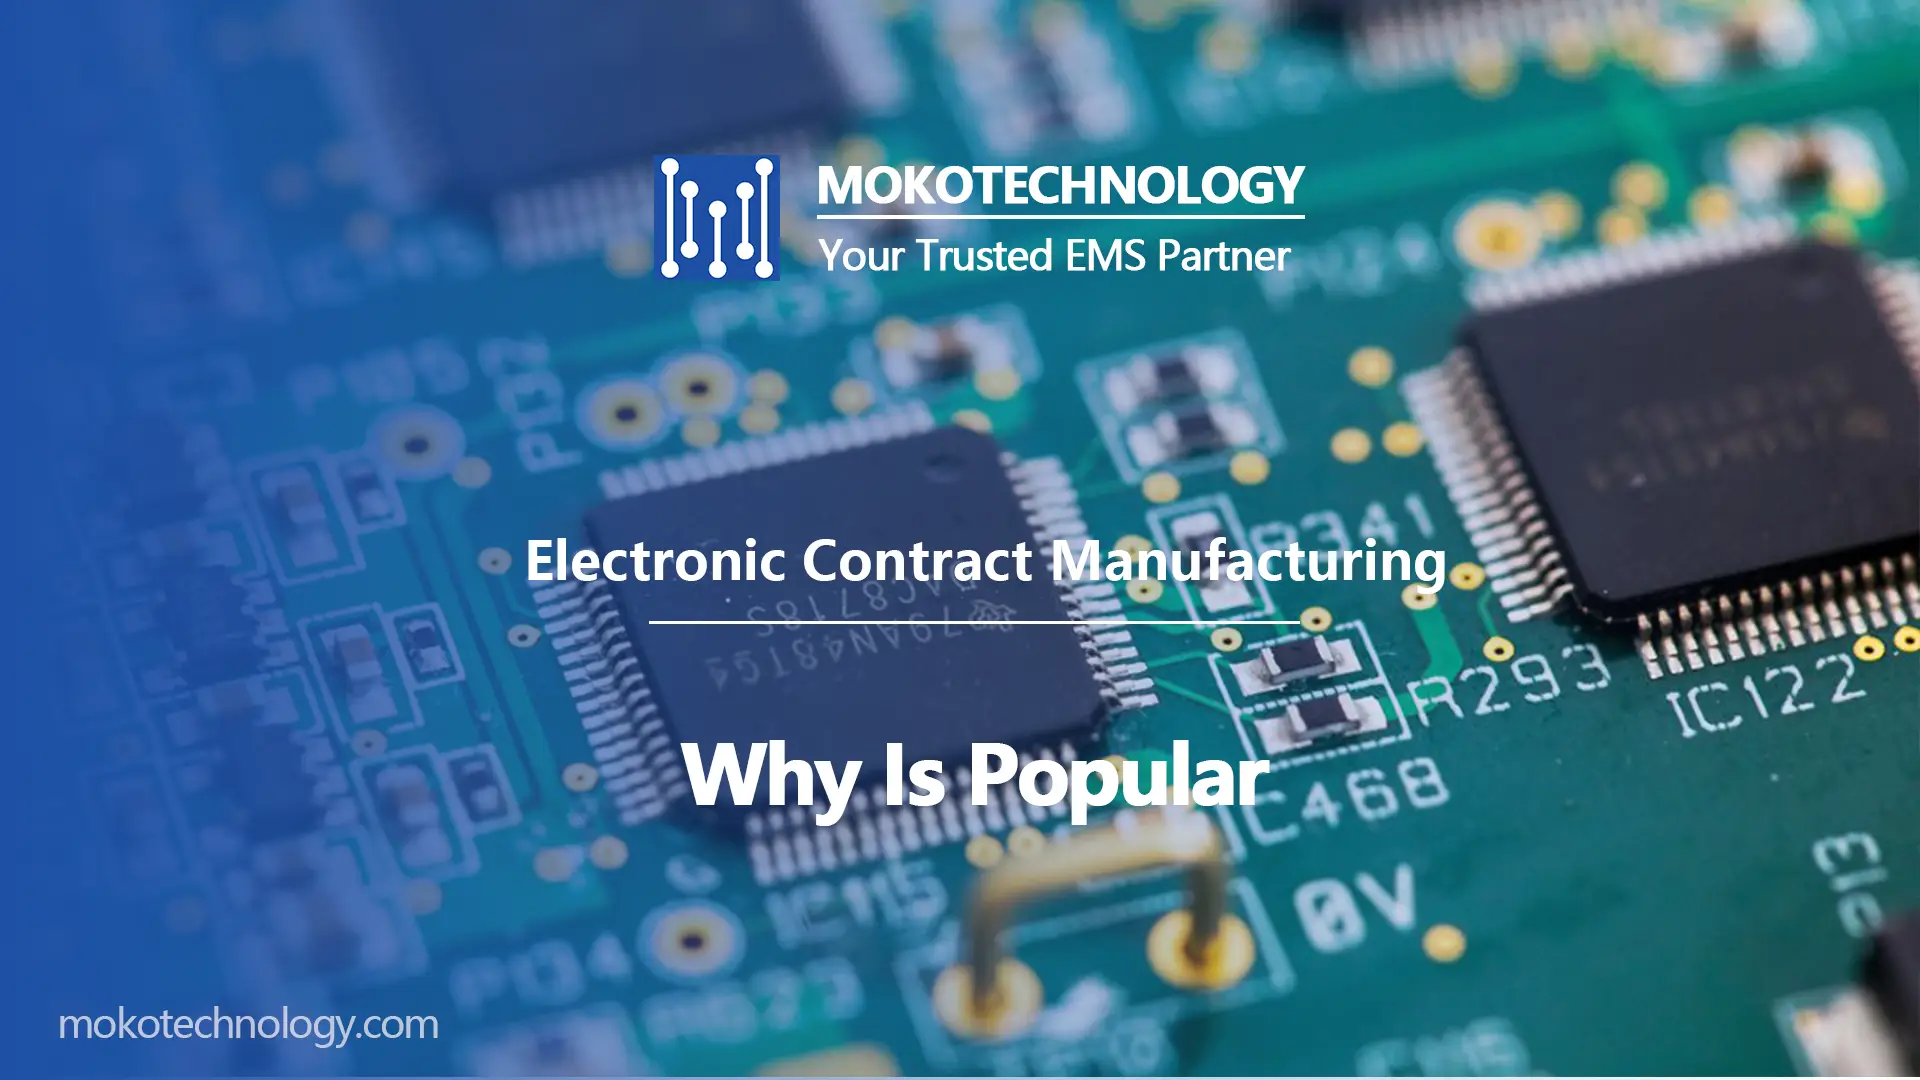 Why Is Electronic Contract Manufacturing Popular